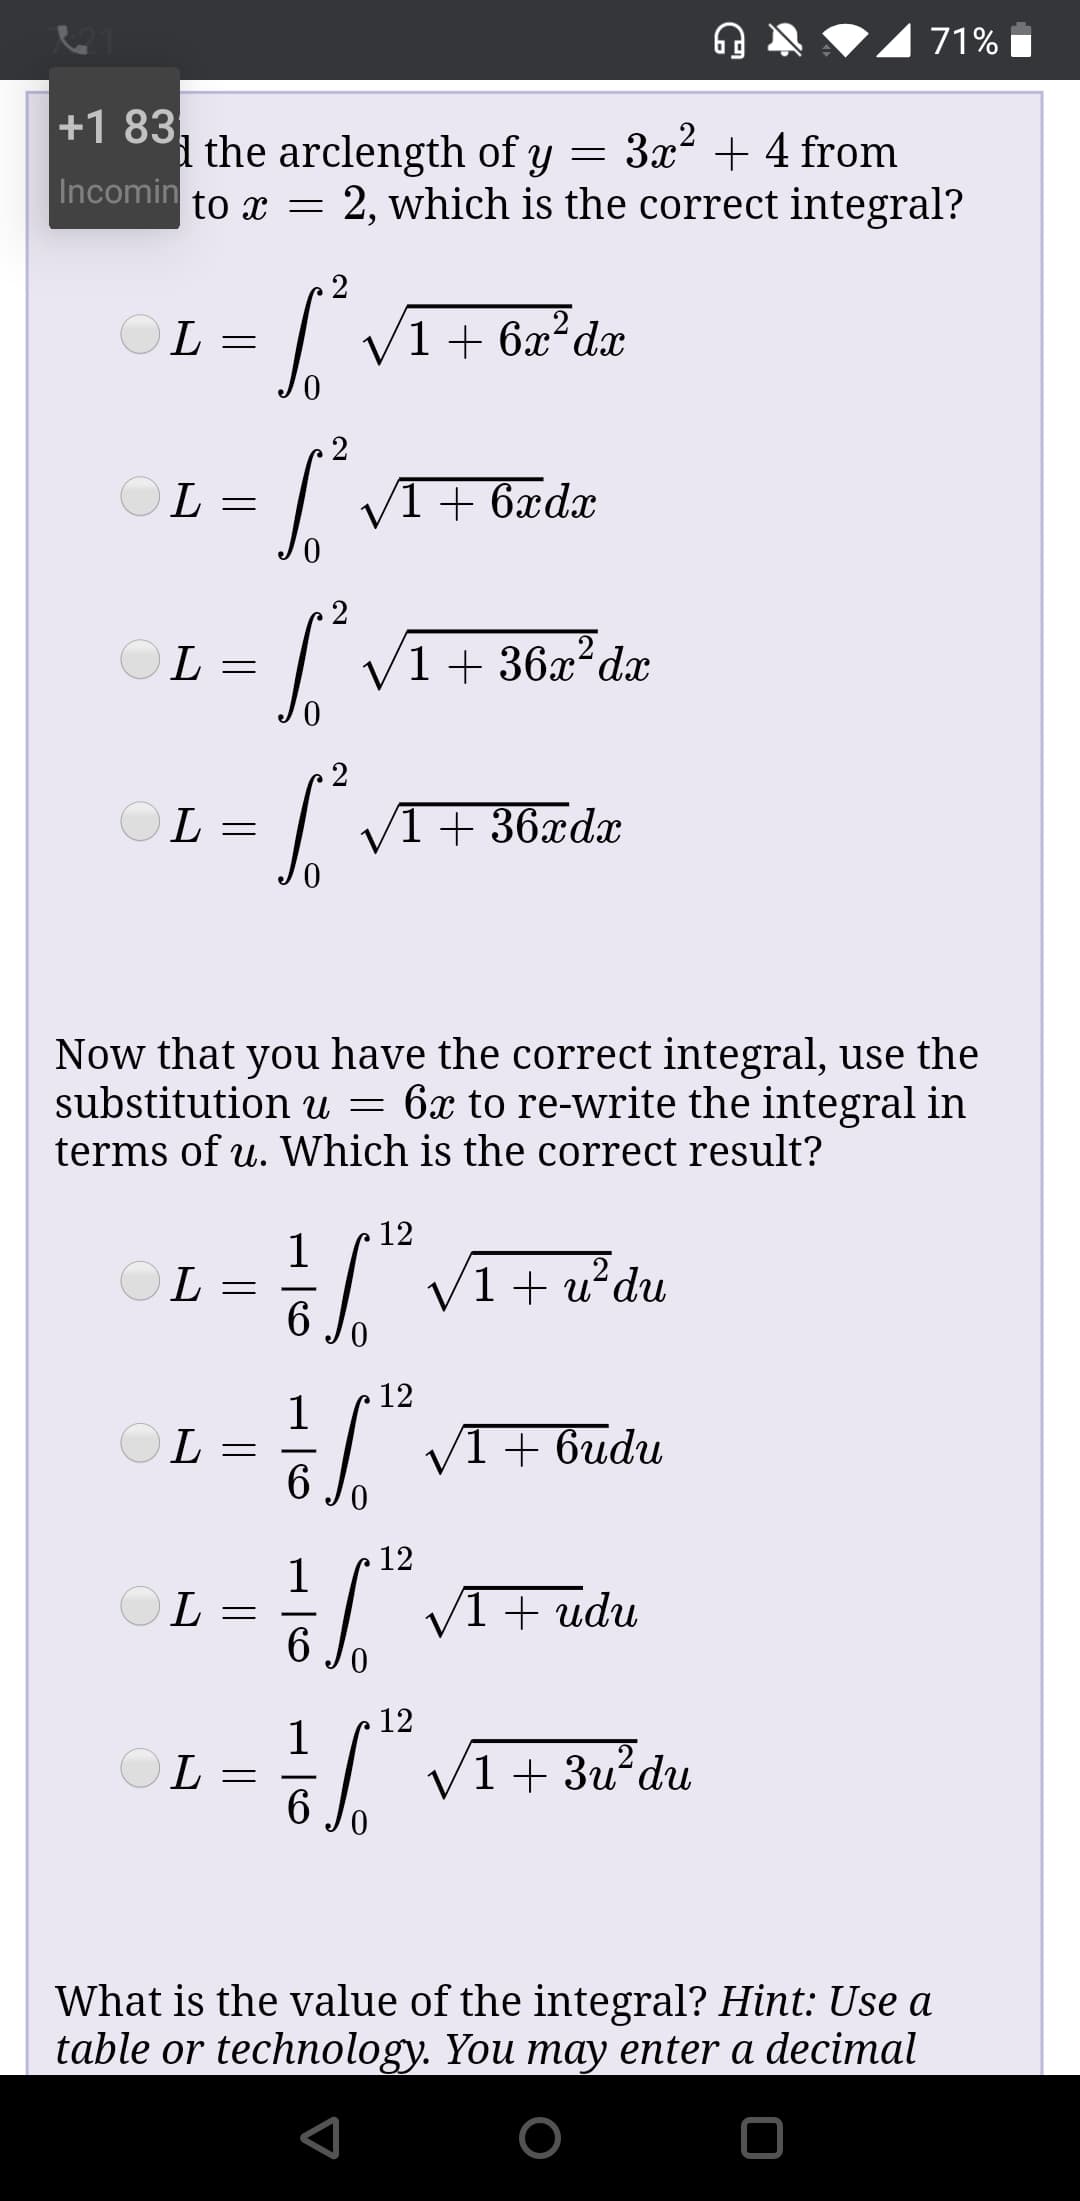 71%
+1 83,
i the arclength of y = 3x? + 4 from
Incomin to r = 2, which is the correct integral?
OL =
1 + 6x²dx
OL =
VI+ 6xdx
OL
V1+ 36x²dx
/1+ 36xdx
L :
Now that you have the correct integral, use the
substitution u = 6x to re-write the integral in
terms of u. Which is the correct result?
12
V1+u²du
6.
12
V1+ 6udu
OL
12
OL =
6
1 + udu
0.
12
OL =
6.
V1+ 3u?du
What is the value of the integral? Hint: Use a
table or technology. You may enter a decimal
